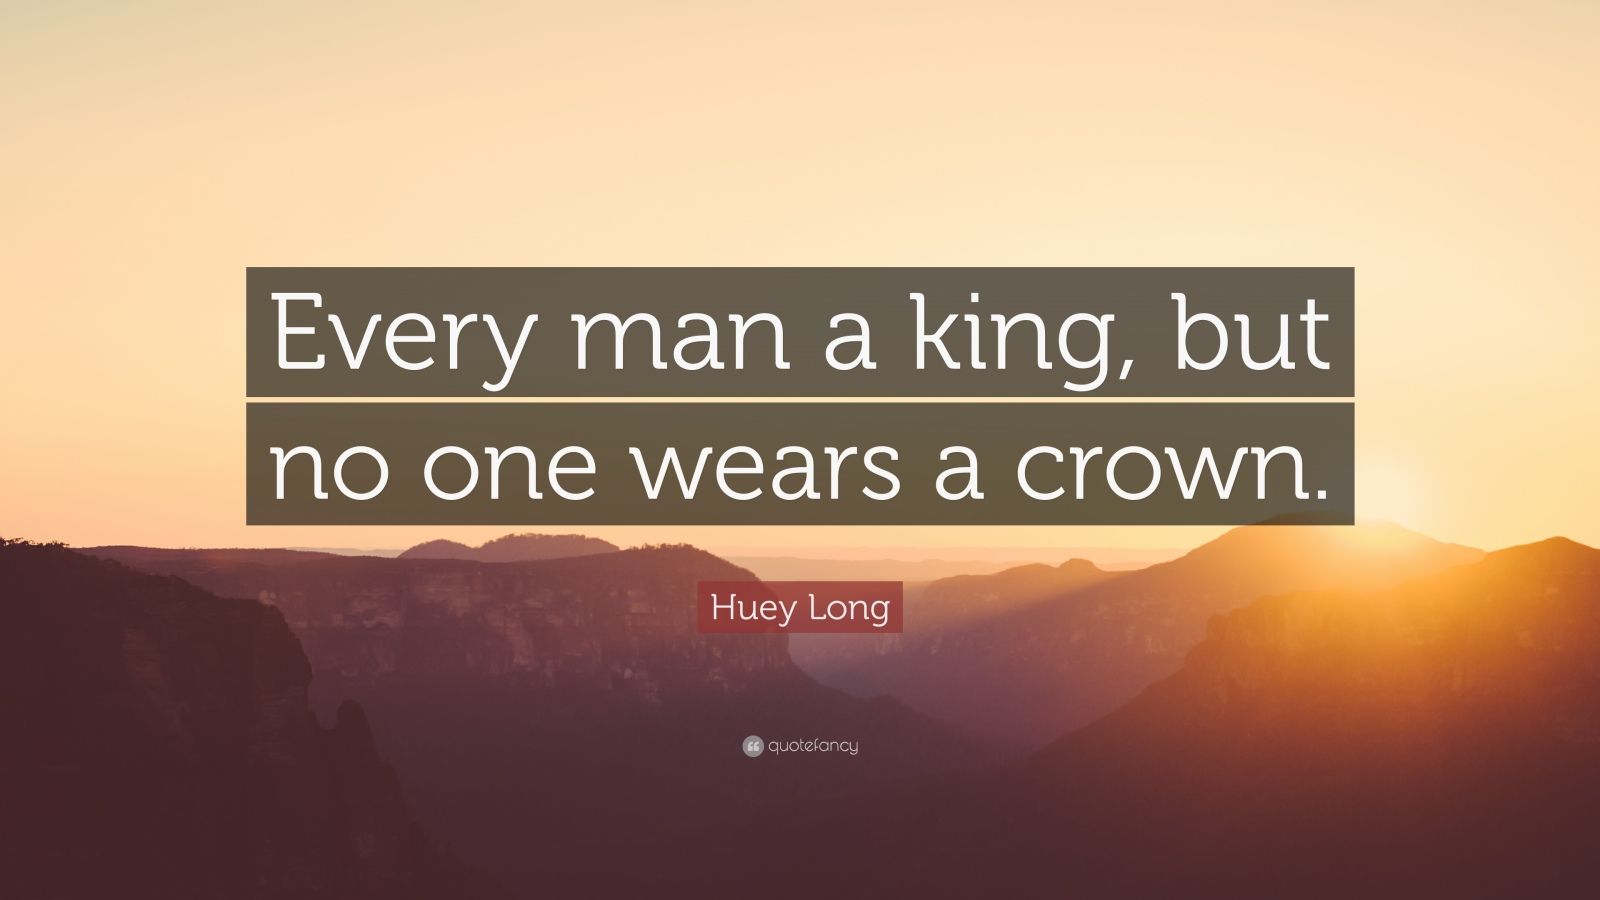 Huey Long Quotes (29 wallpapers) - Quotefancy